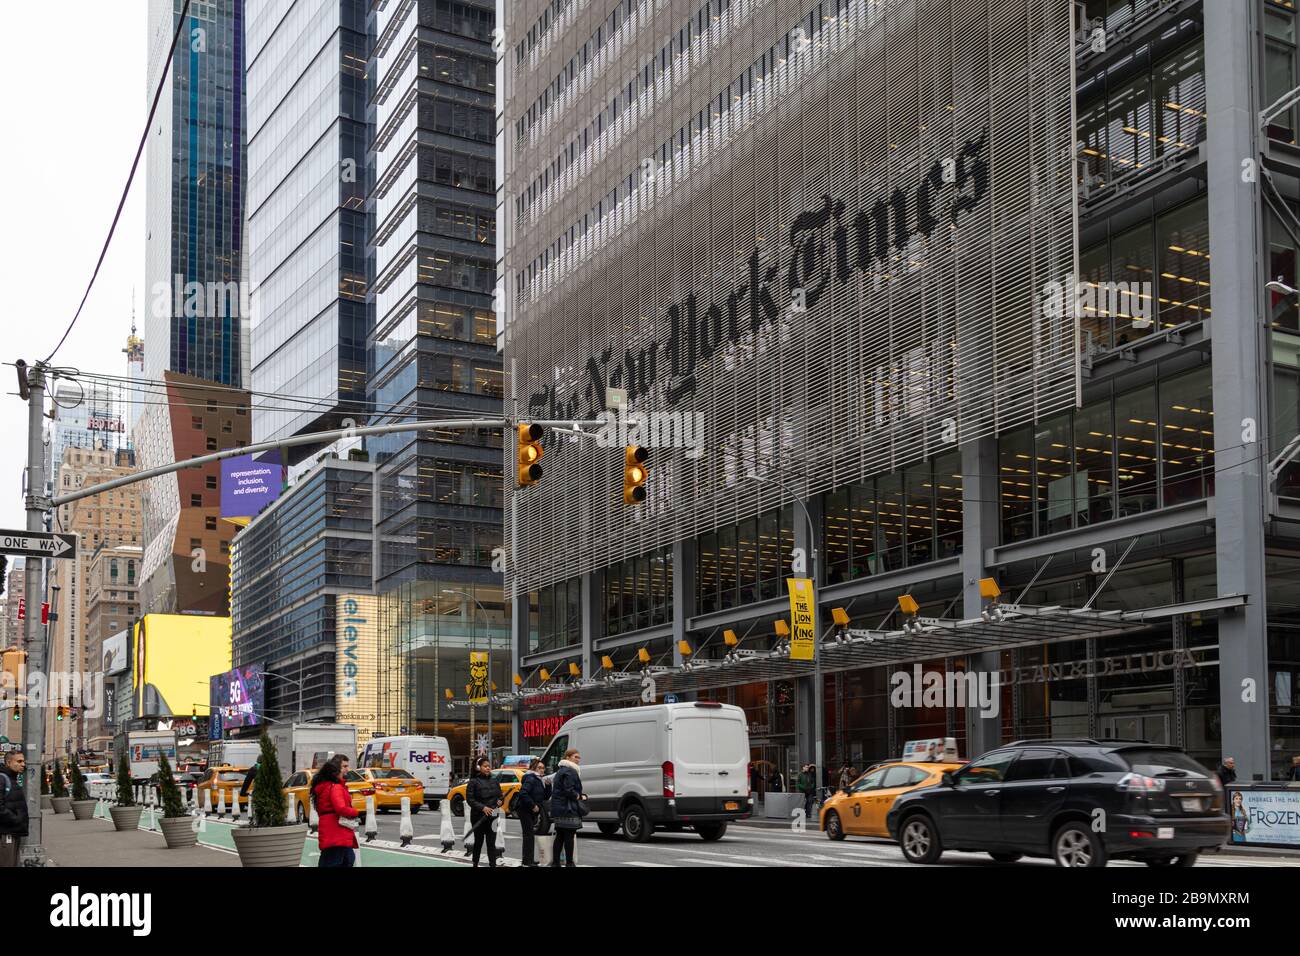 The New York Times newspaper headquarters building in Eighth Avenue; 40th & 41st Street exterior daylight view with people and cars in the street Stock Photo